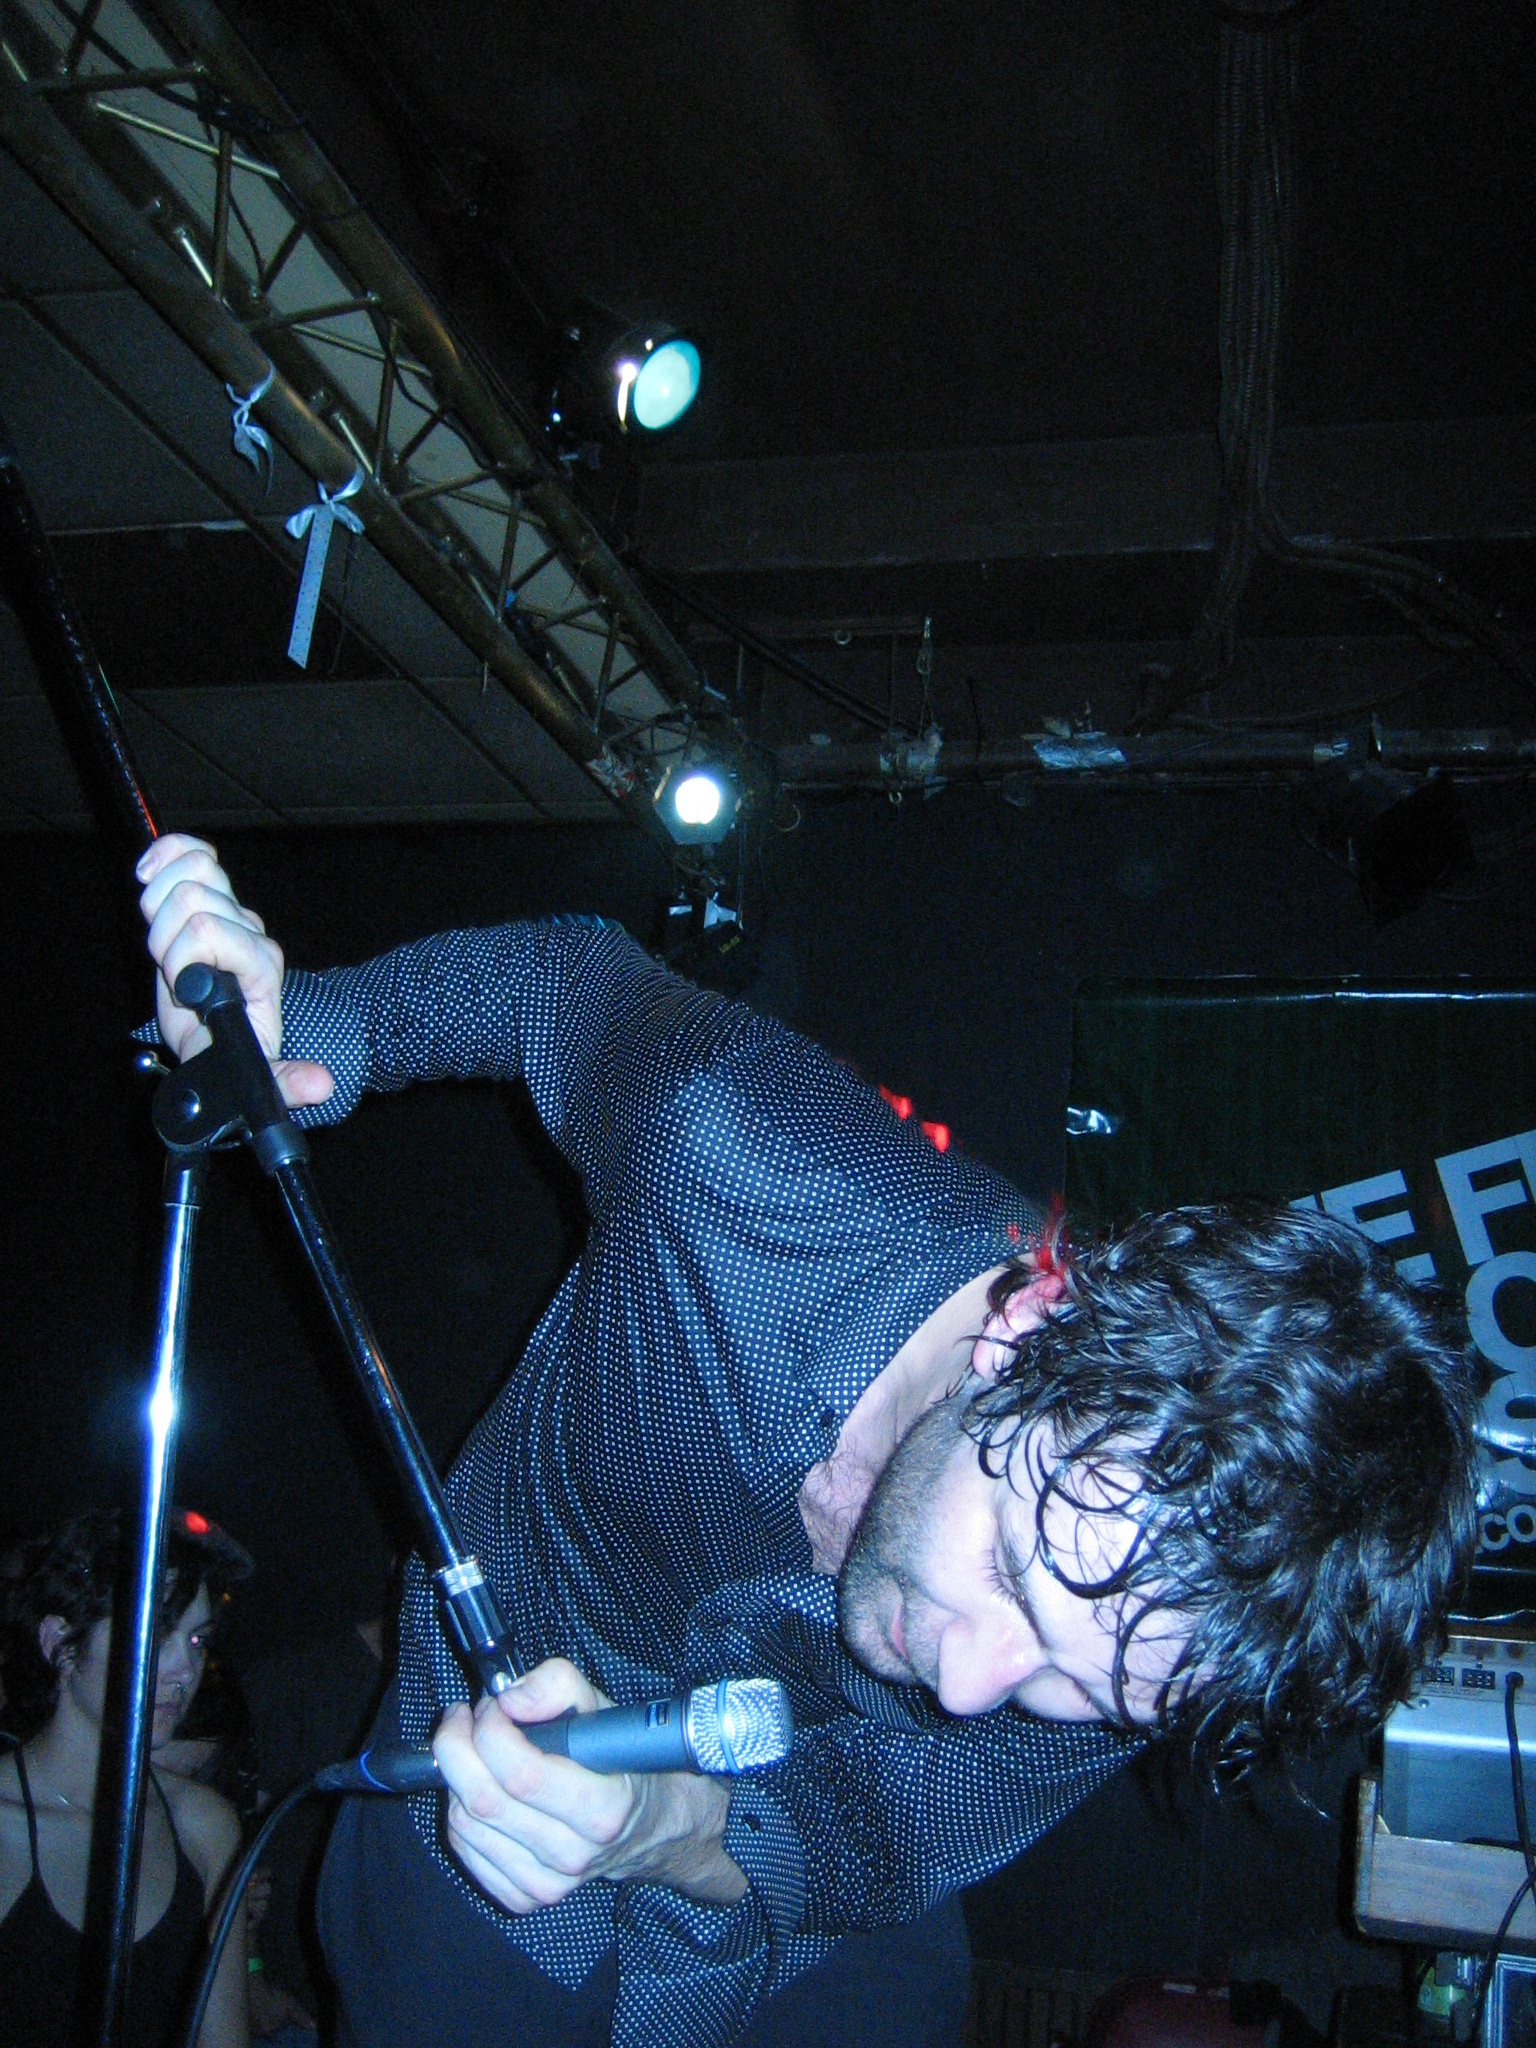 a young man with curly hair playing on a metal pole